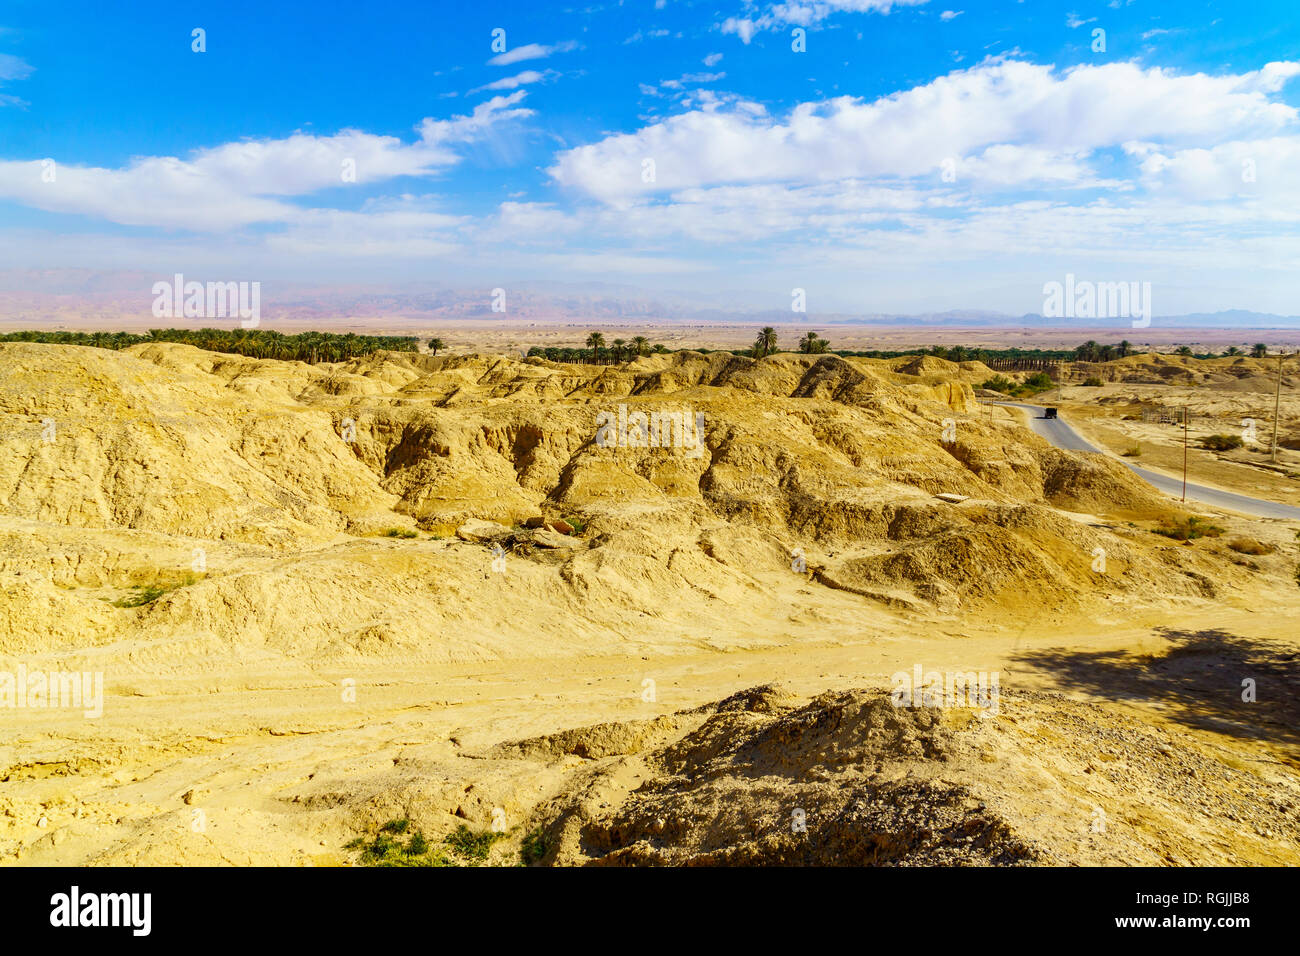 Landscape of lissan marl rocks and the Edom mountains, along the Arava Peace Road, Southern Israel Stock Photo